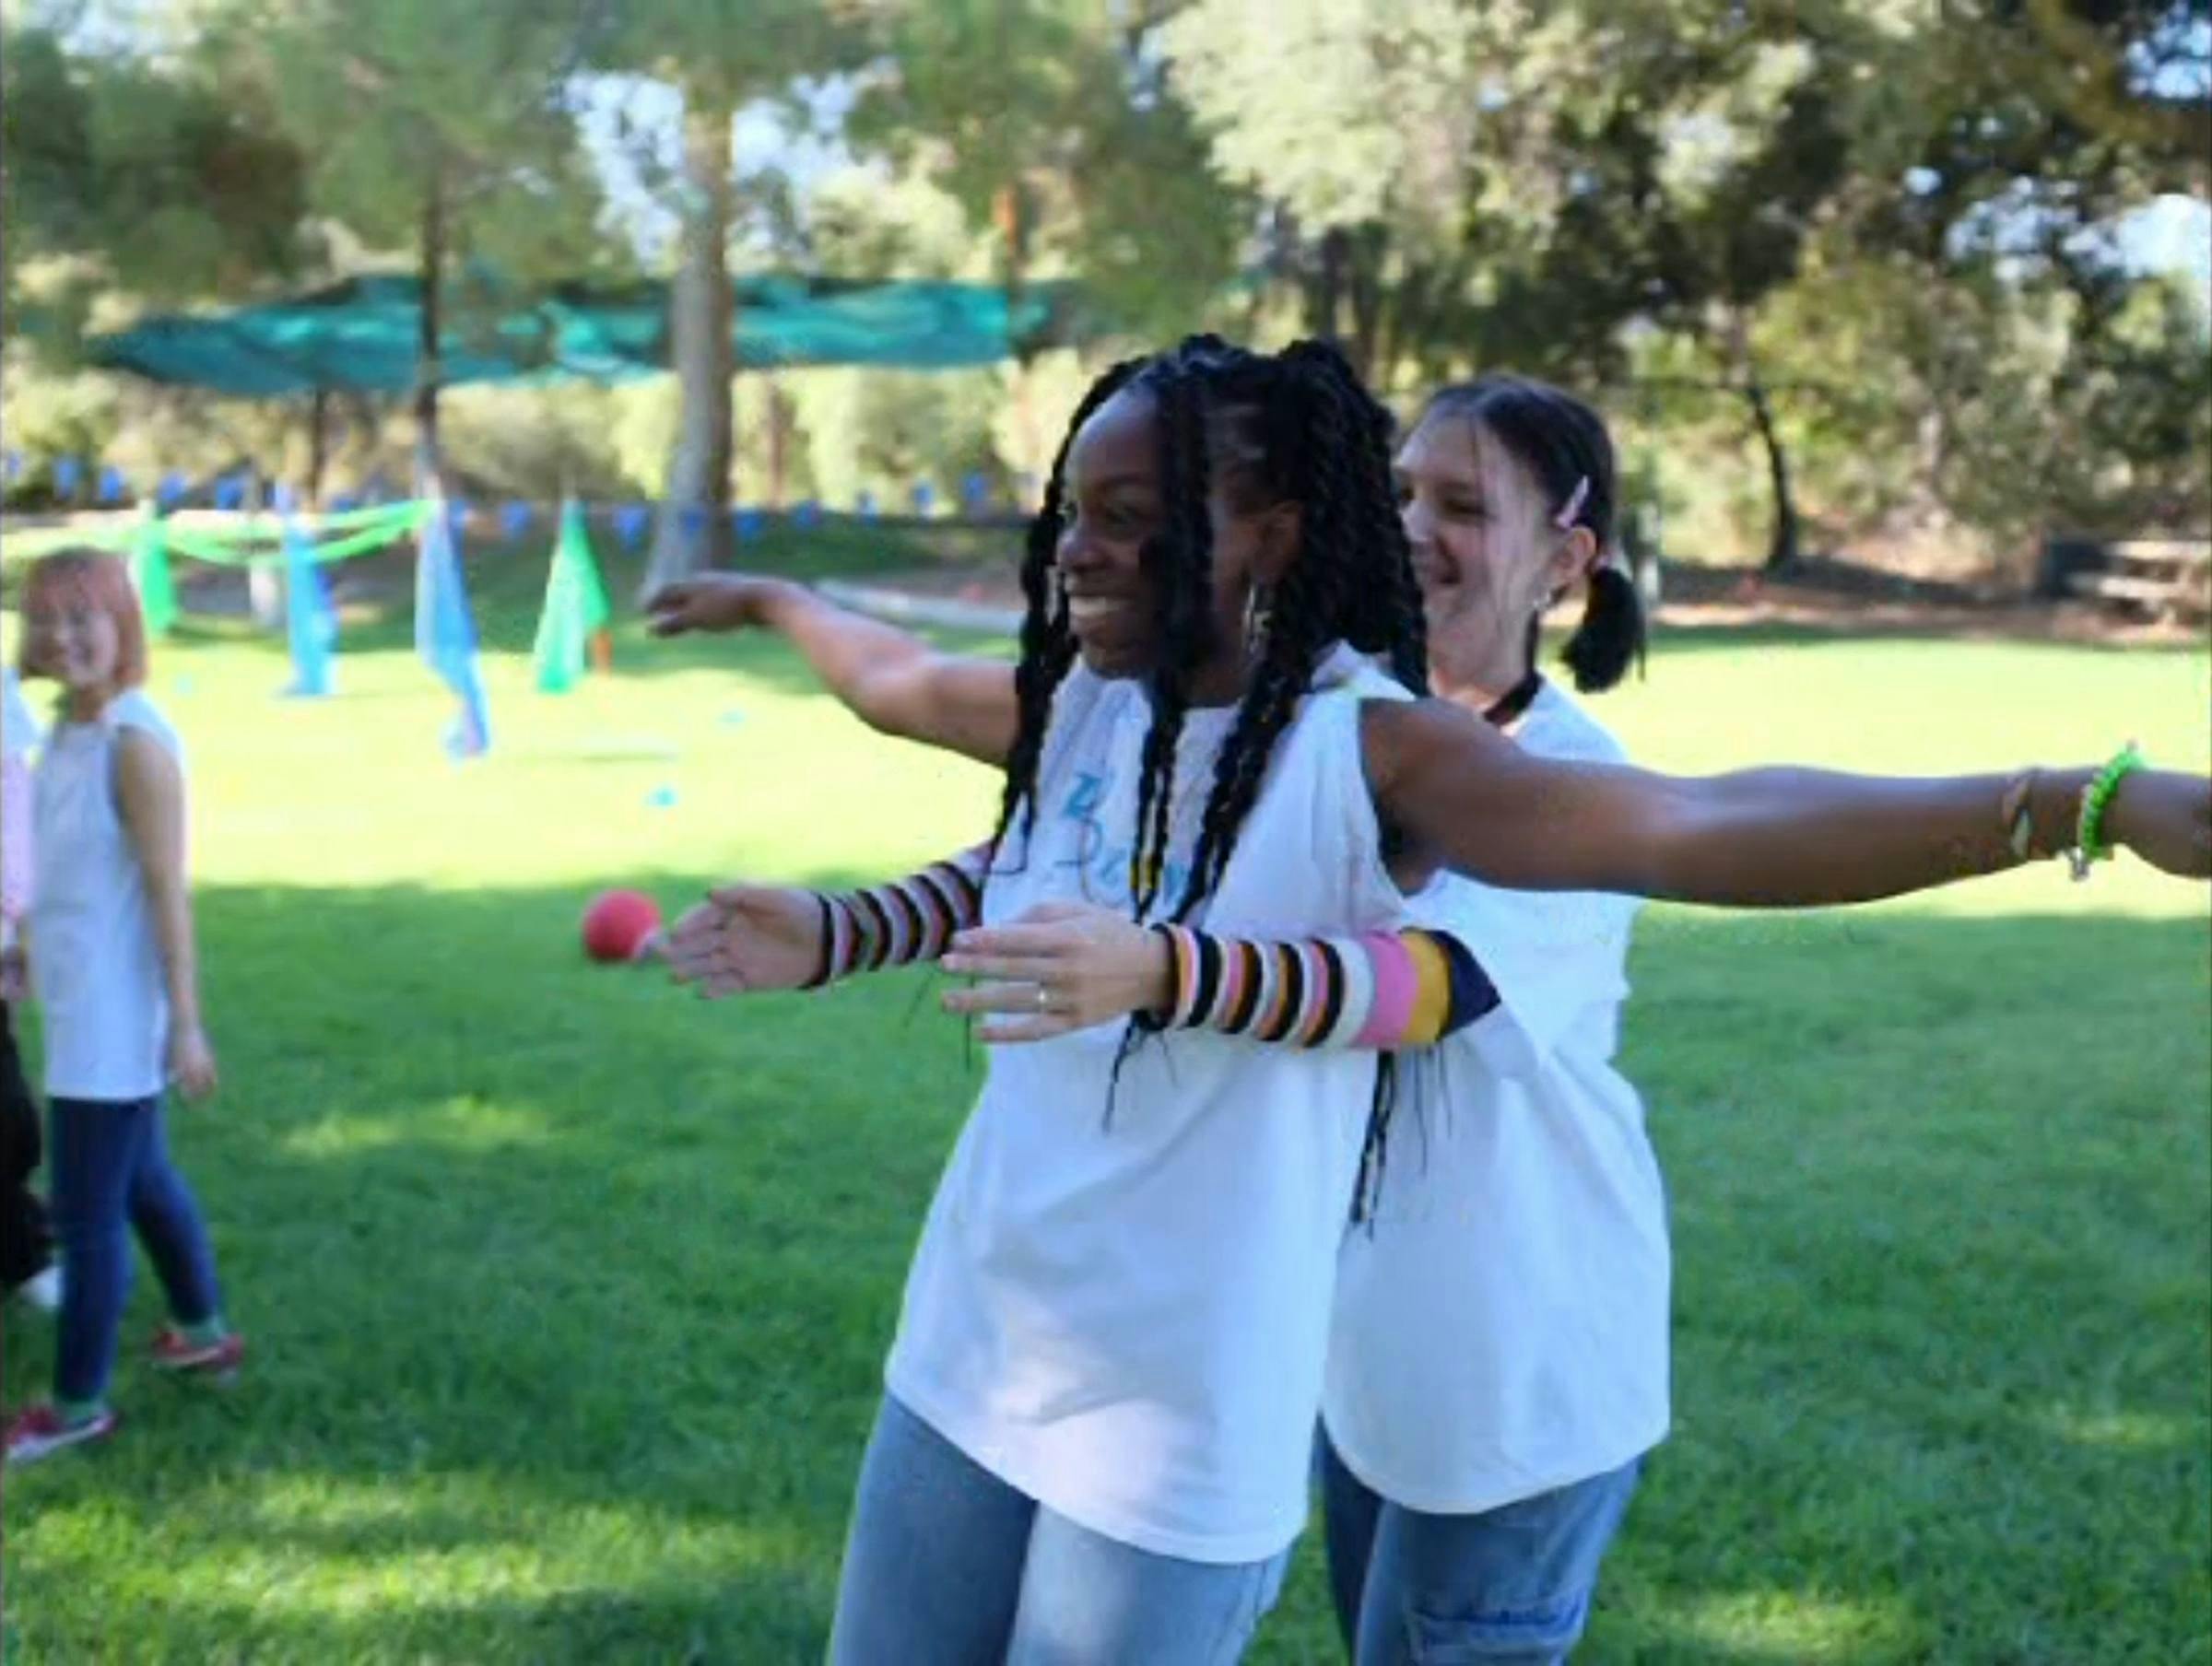 two young people wearing white tshirts are in a park. One person is leaning back on the other in anticipation they will catch her